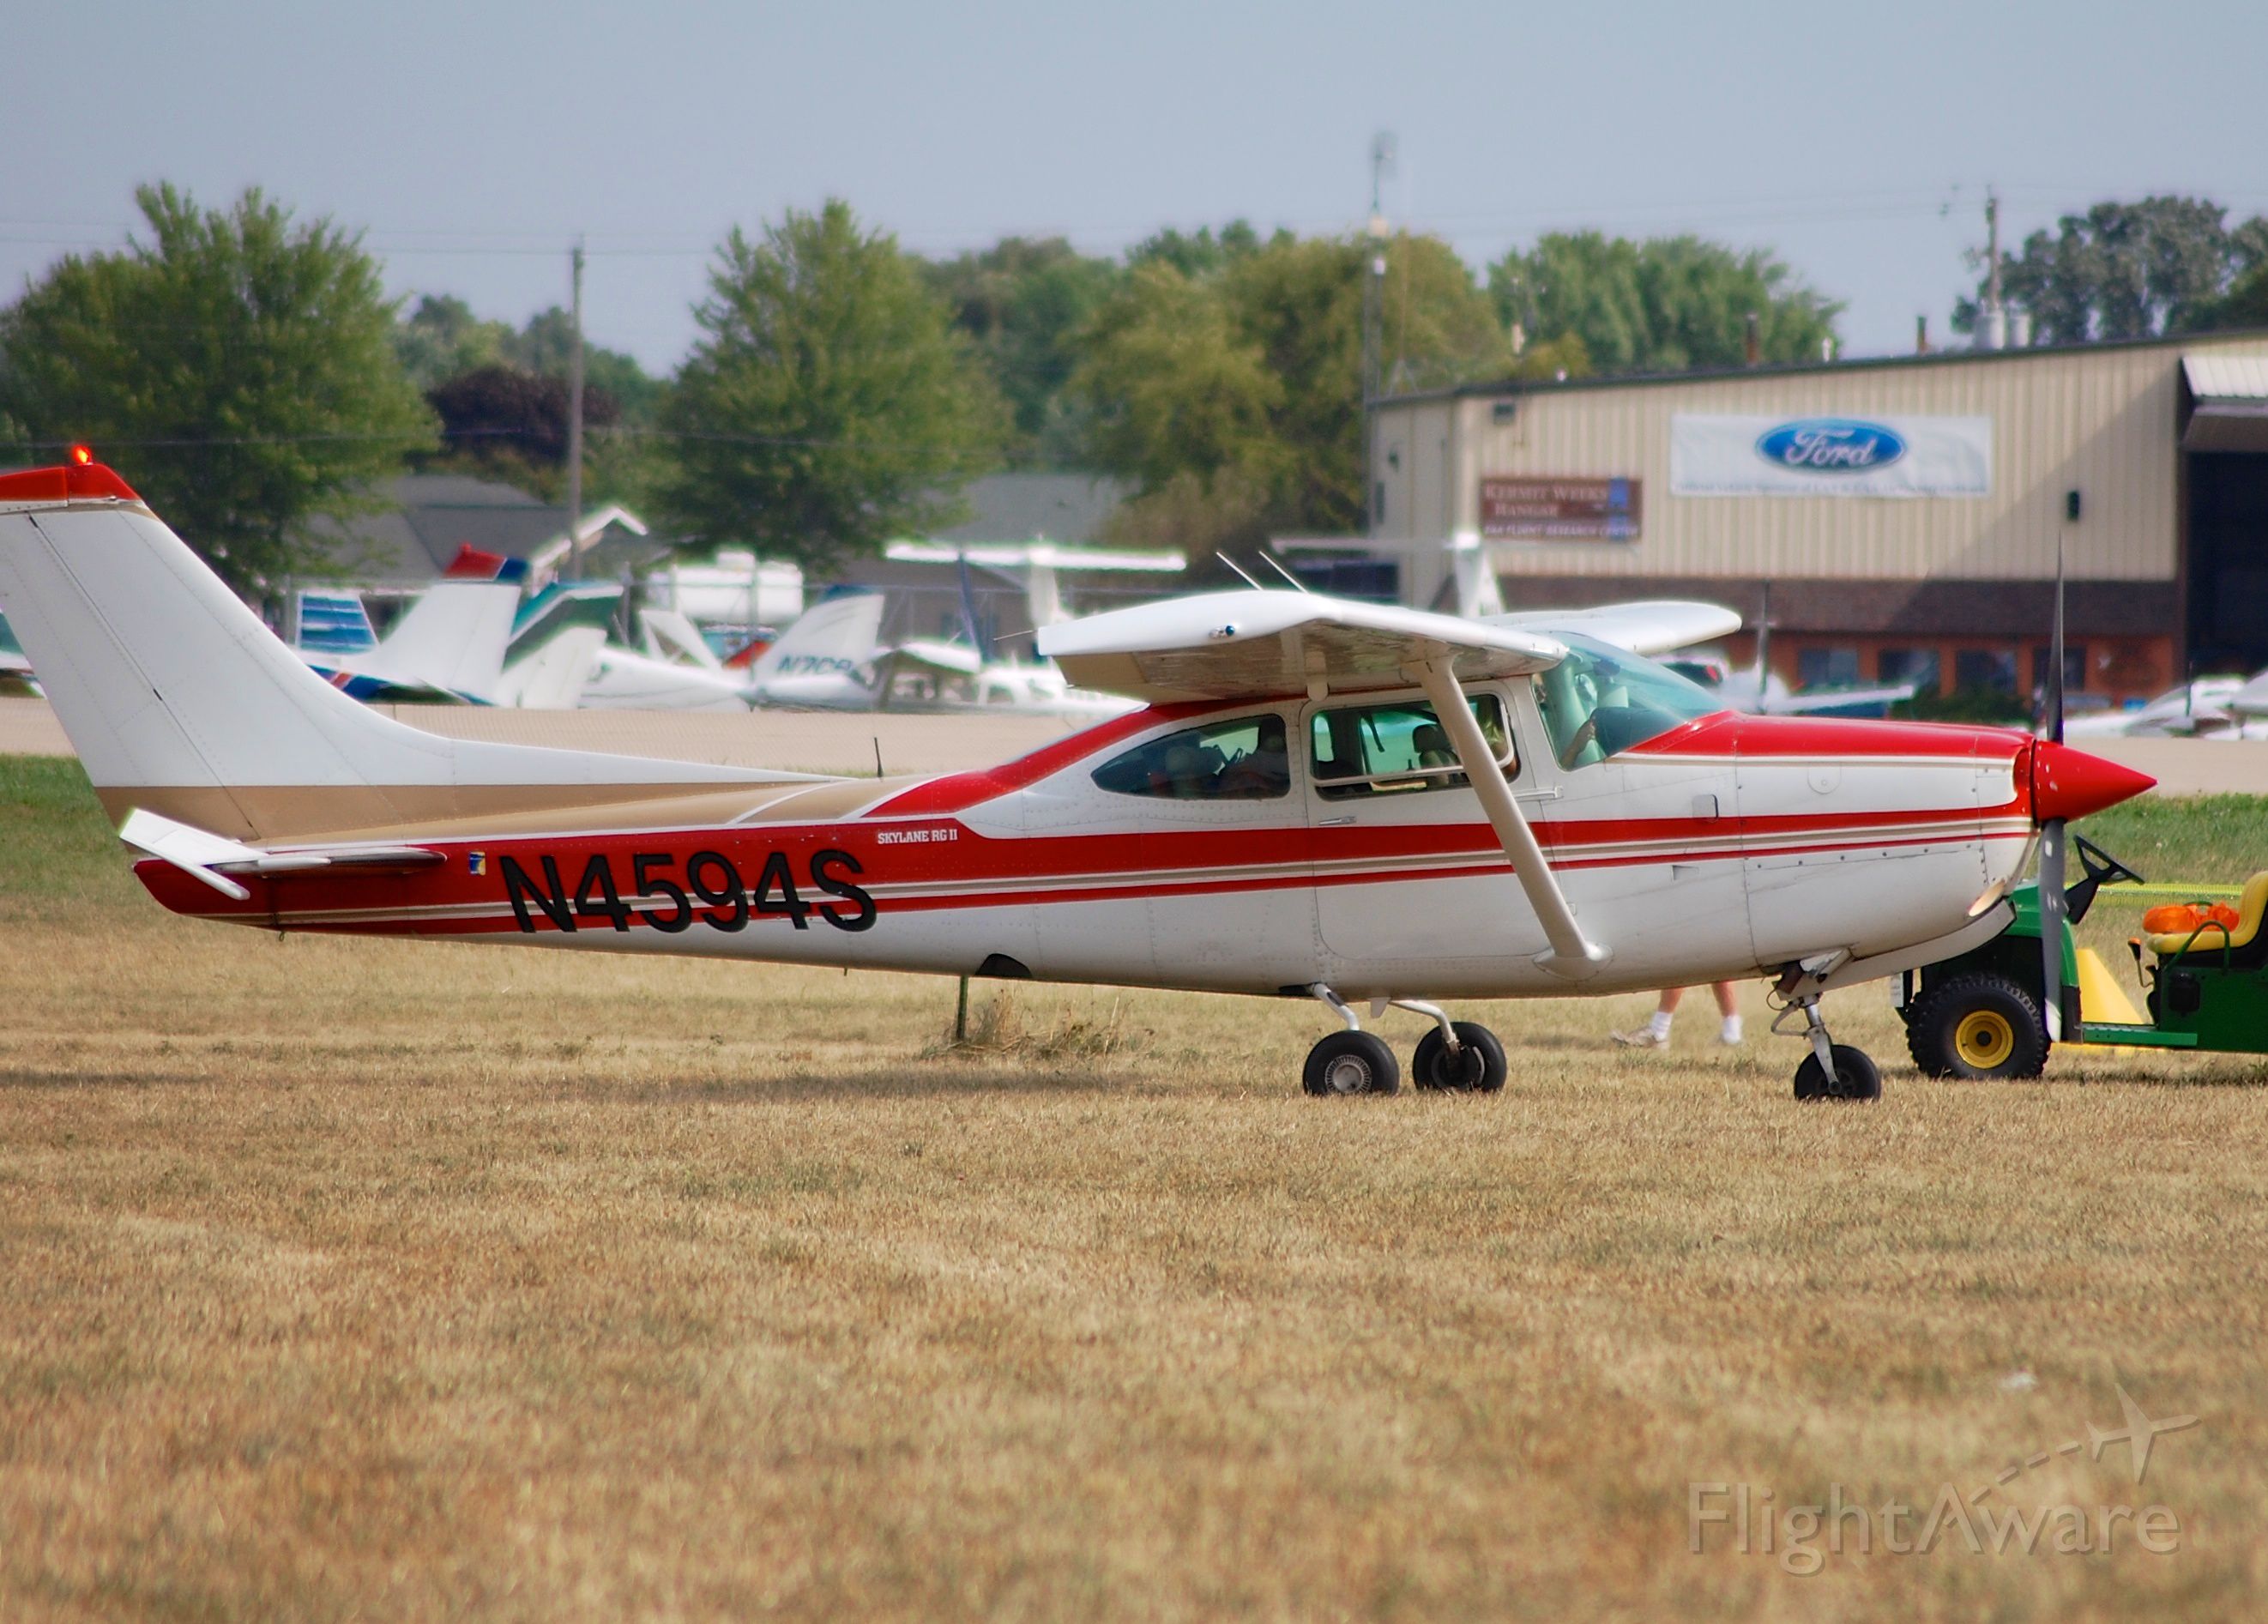 Cessna Skylane RG (N4594S) - Taxiing for departure at EAA Airventure/Oshkosh on 25 July 2012.